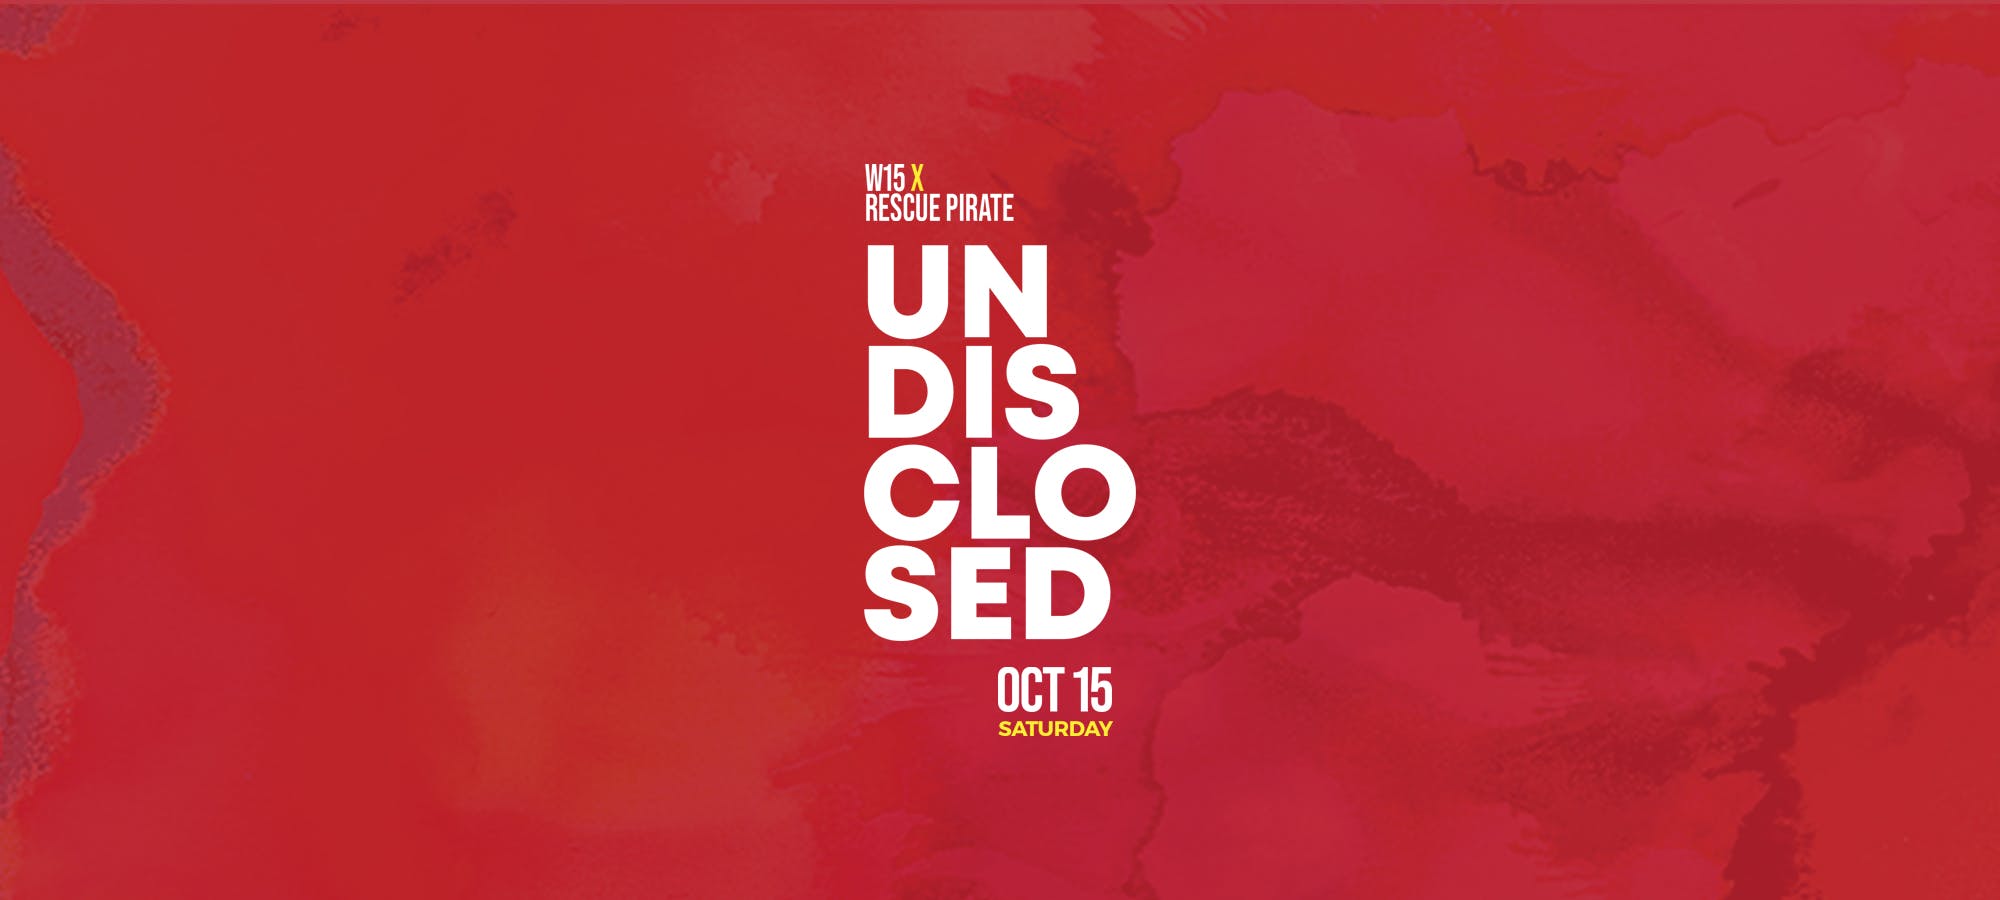  Groove your weekend away with Undisclosed at W15 Weligama